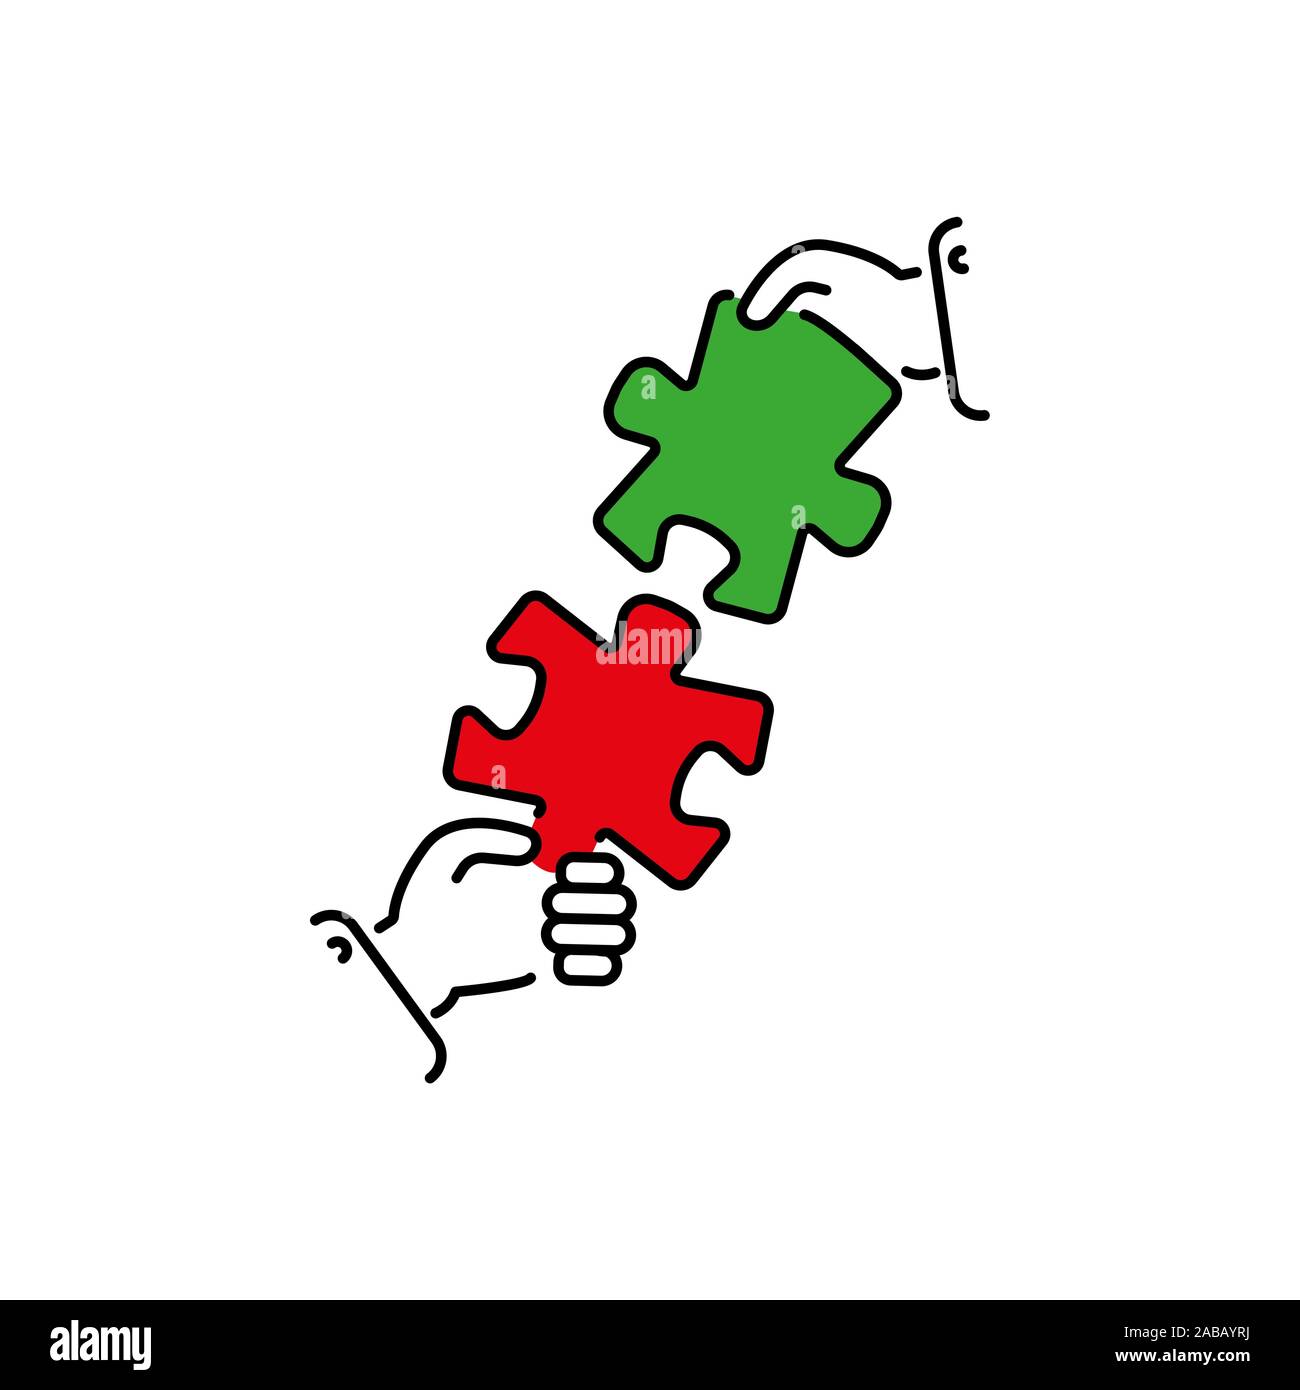 Connecting puzzles Stock Vector Images - Alamy